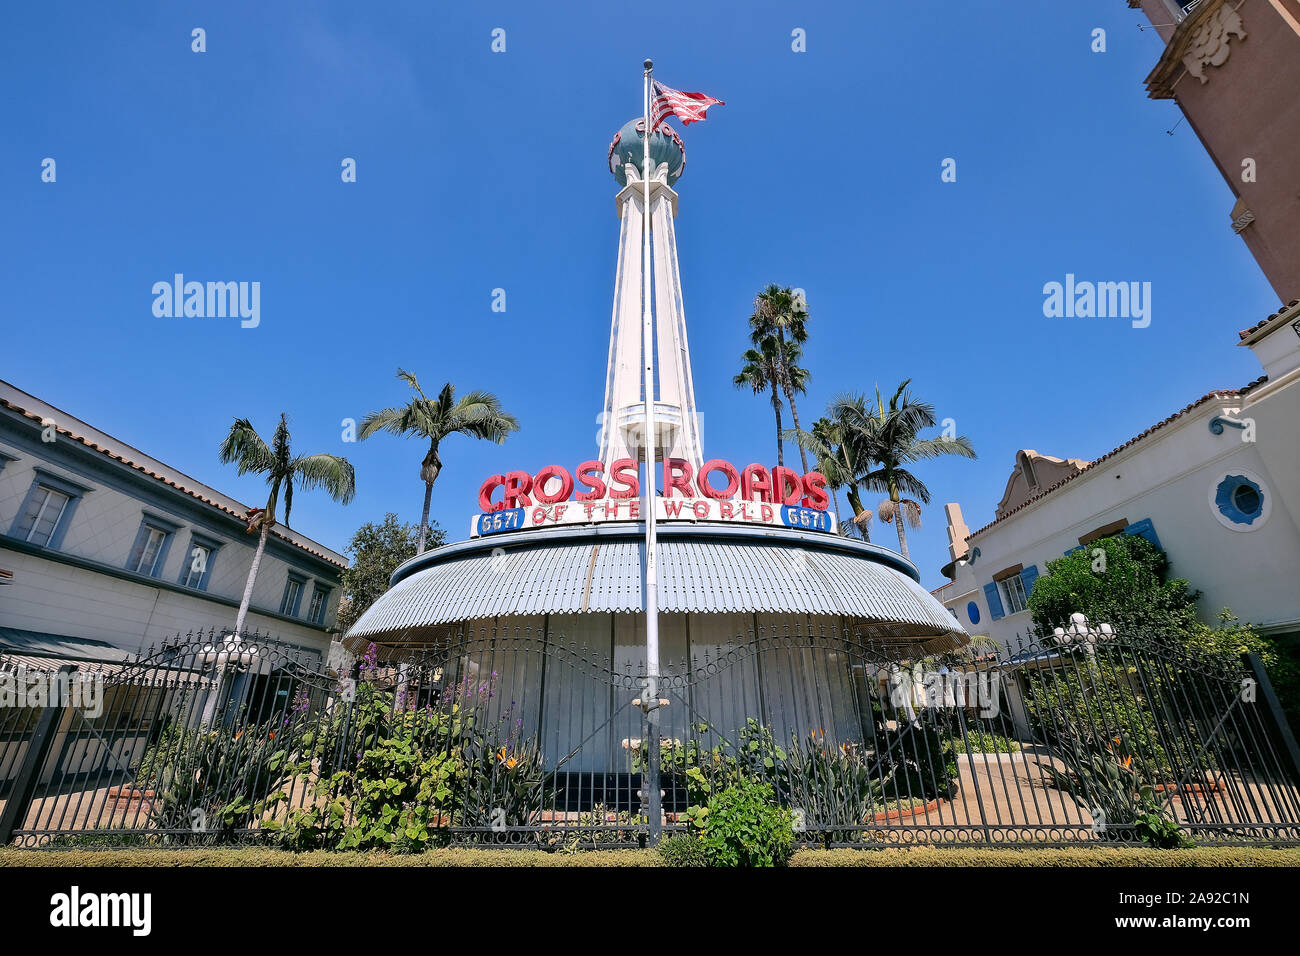 Iconic building, Crossroads of the World, outdoor shopping center, on Sunset Boulevard, Hollywood, Los Angeles, California, USA Stock Photo